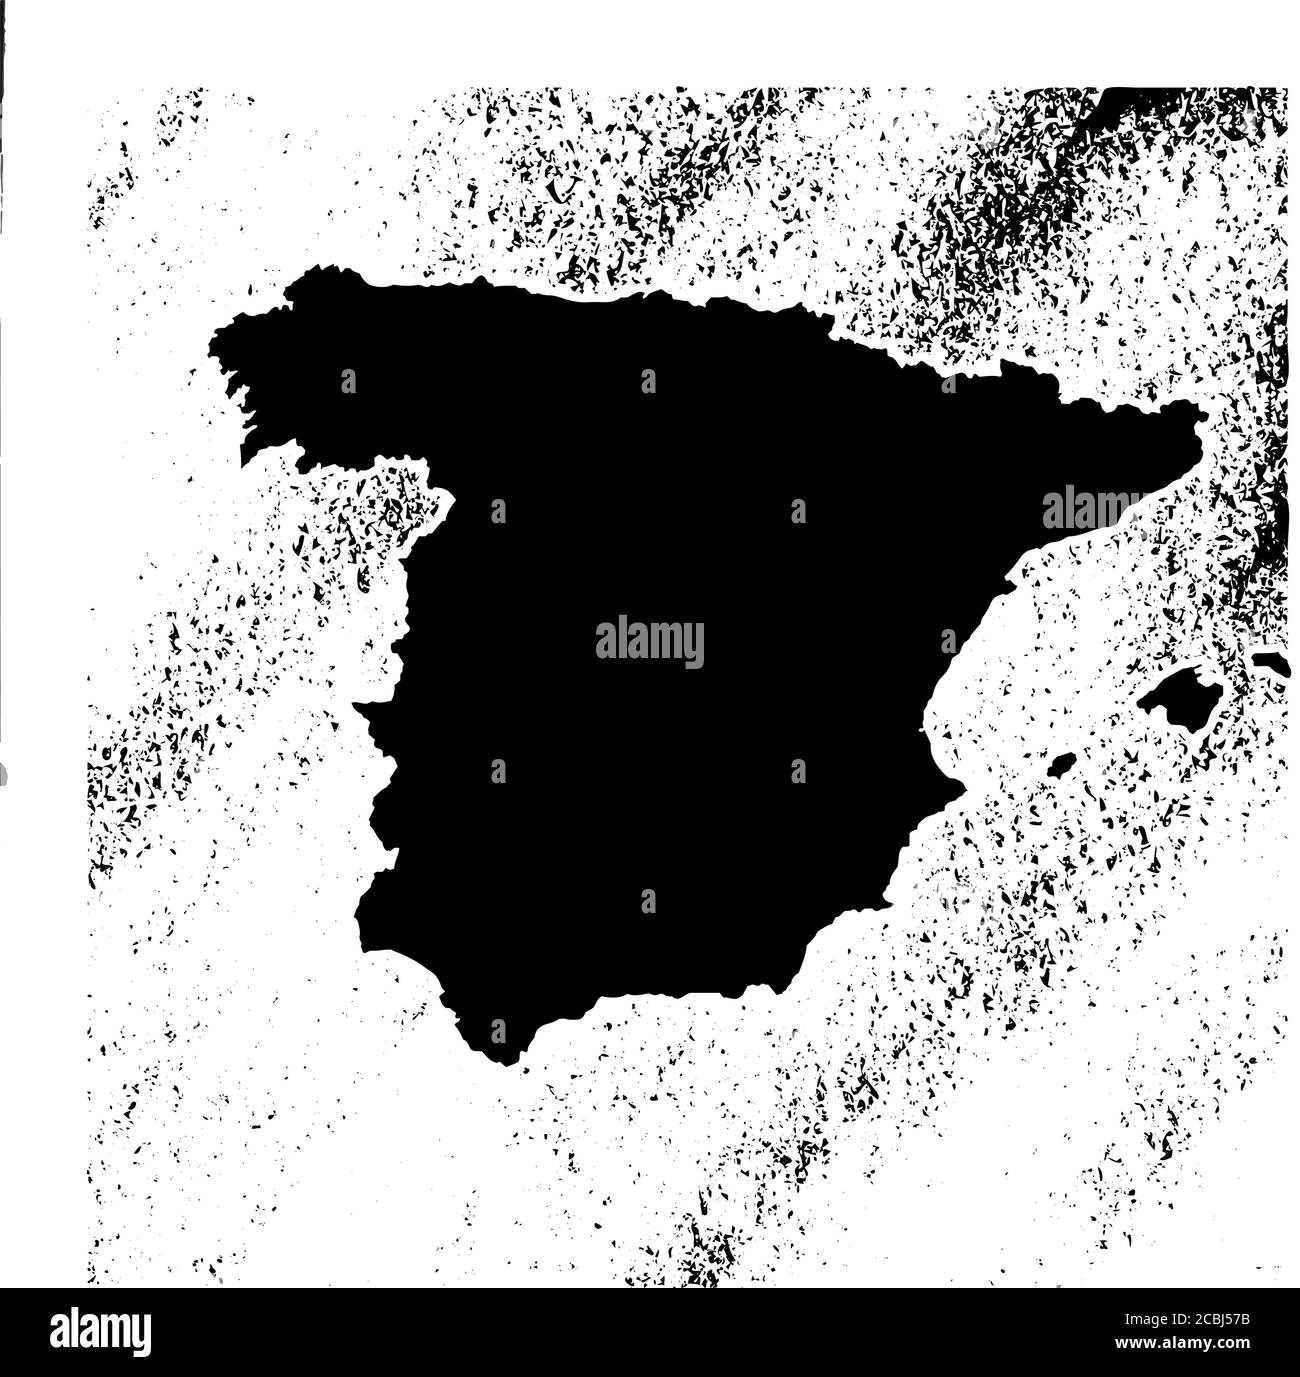 Spanish map on vintage background. Black and white hand drawn illustration. Icon sign for print and labelling. Stock Vector